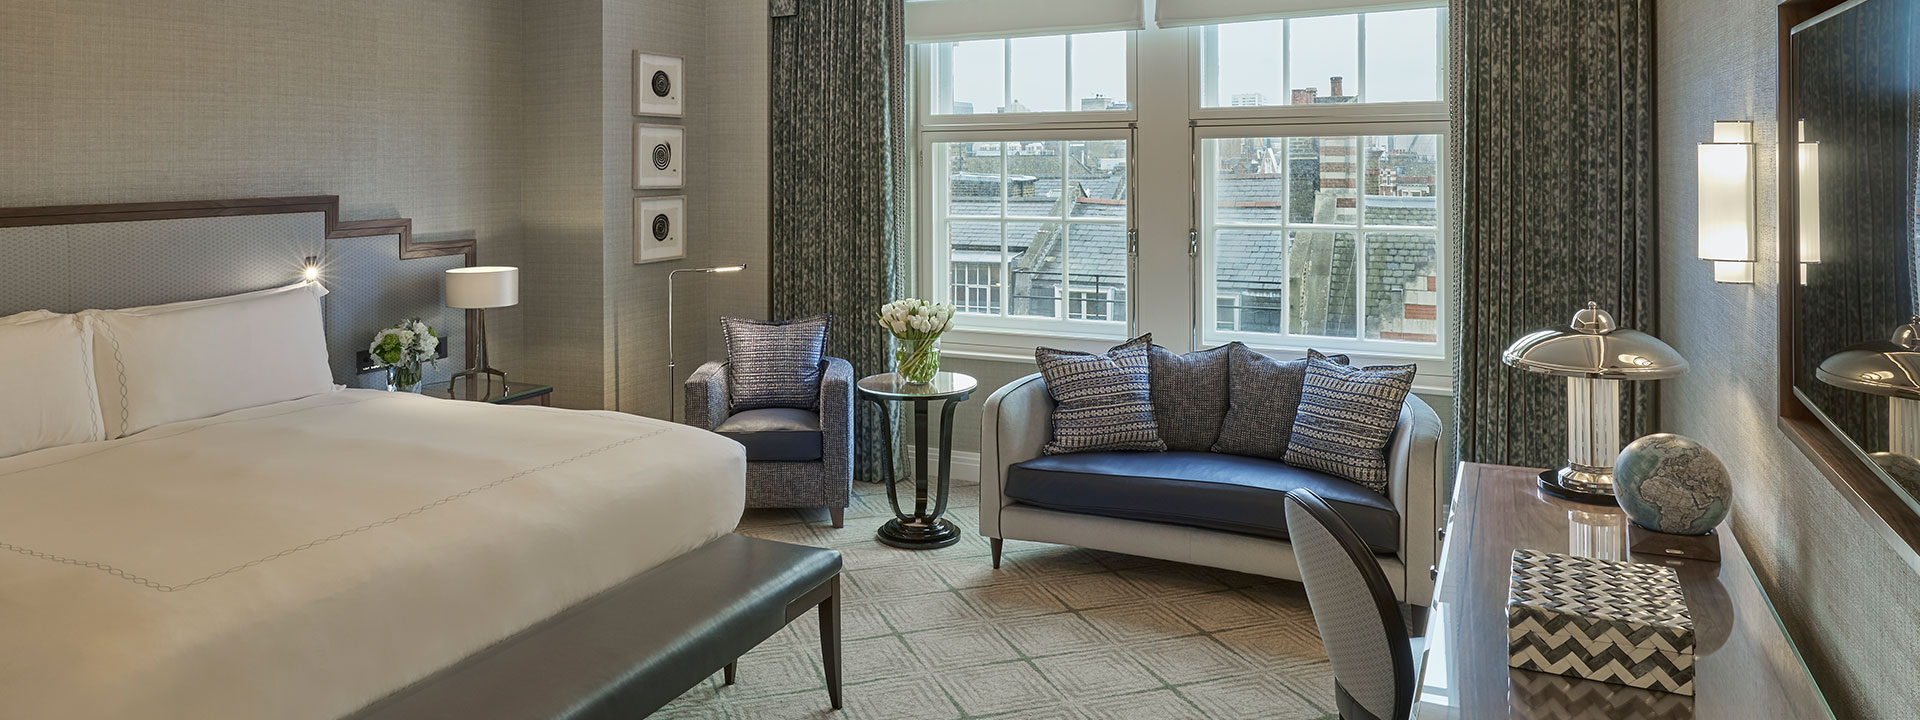 King Bed, sofa, armchair and business table in luxury interior design that can be found in Claridge's Studio.